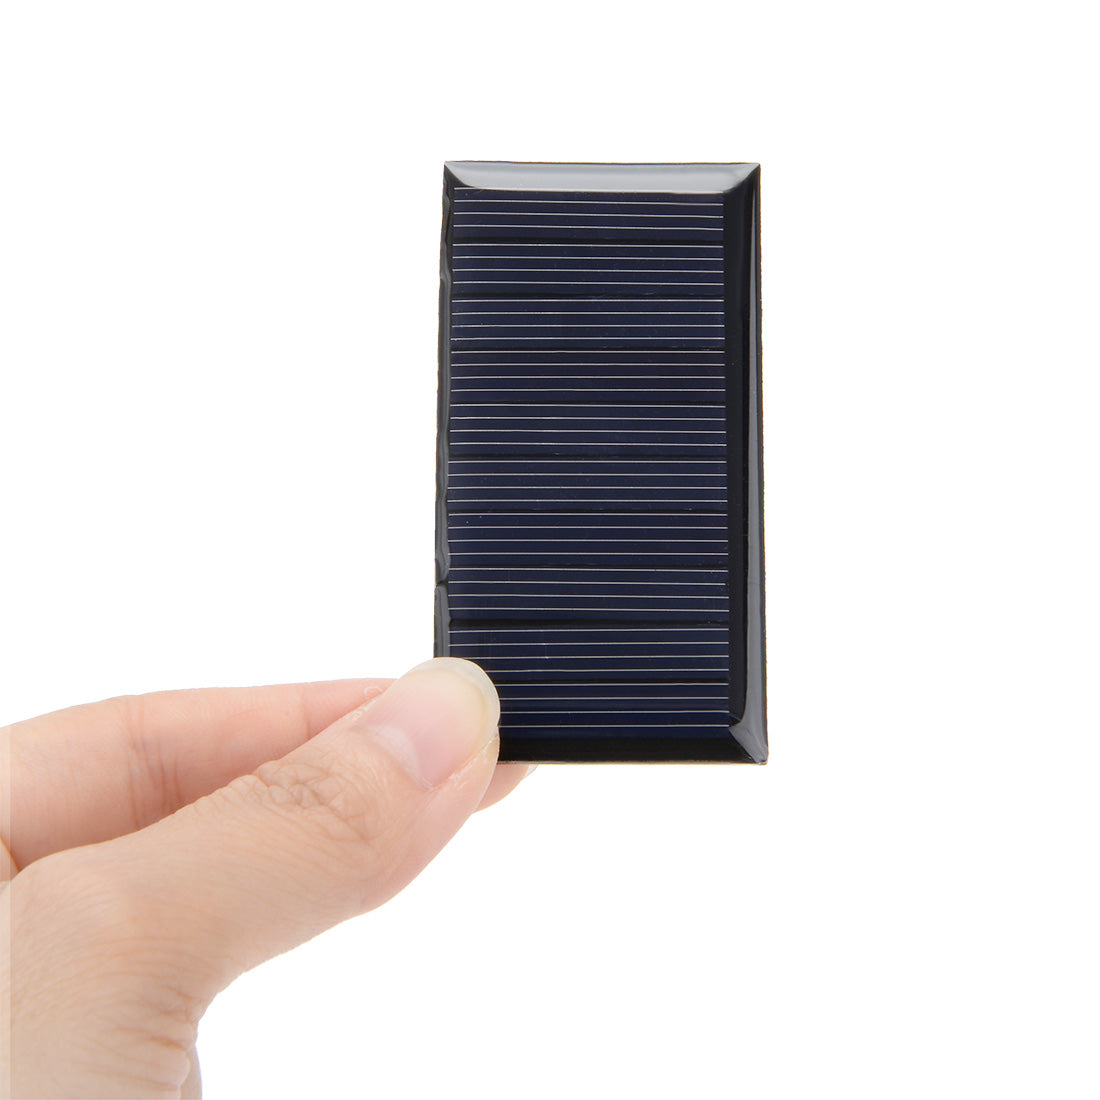 uxcell Uxcell 5Pcs 5V 60mA Poly Mini Solar Cell Panel Module DIY for Light Toys Charger 68mm x 37mm